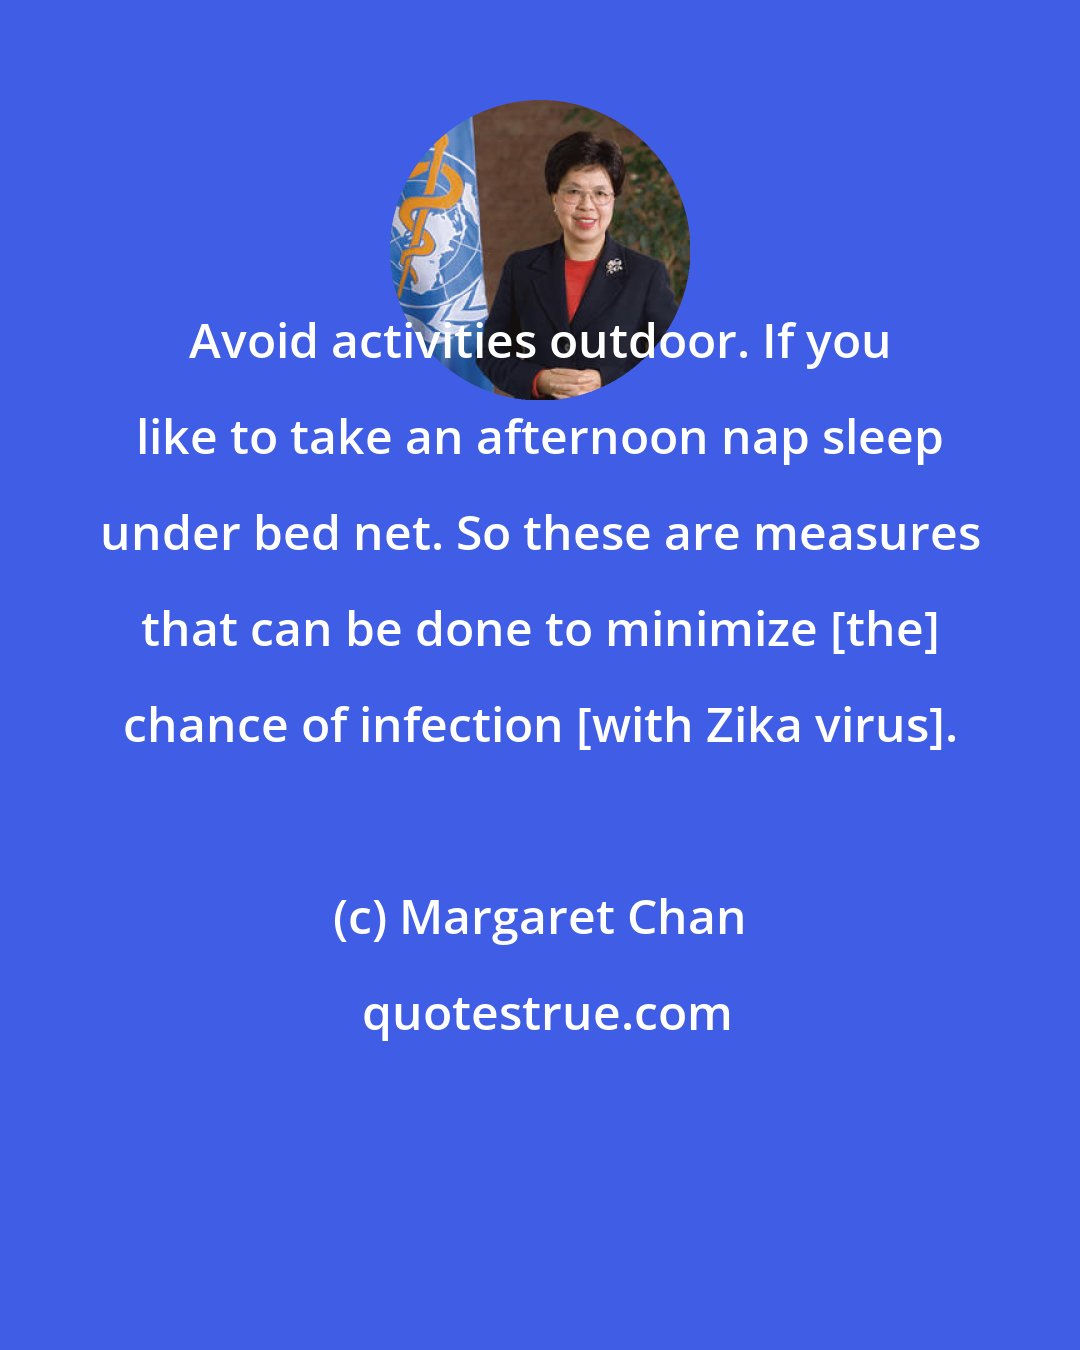 Margaret Chan: Avoid activities outdoor. If you like to take an afternoon nap sleep under bed net. So these are measures that can be done to minimize [the] chance of infection [with Zika virus].